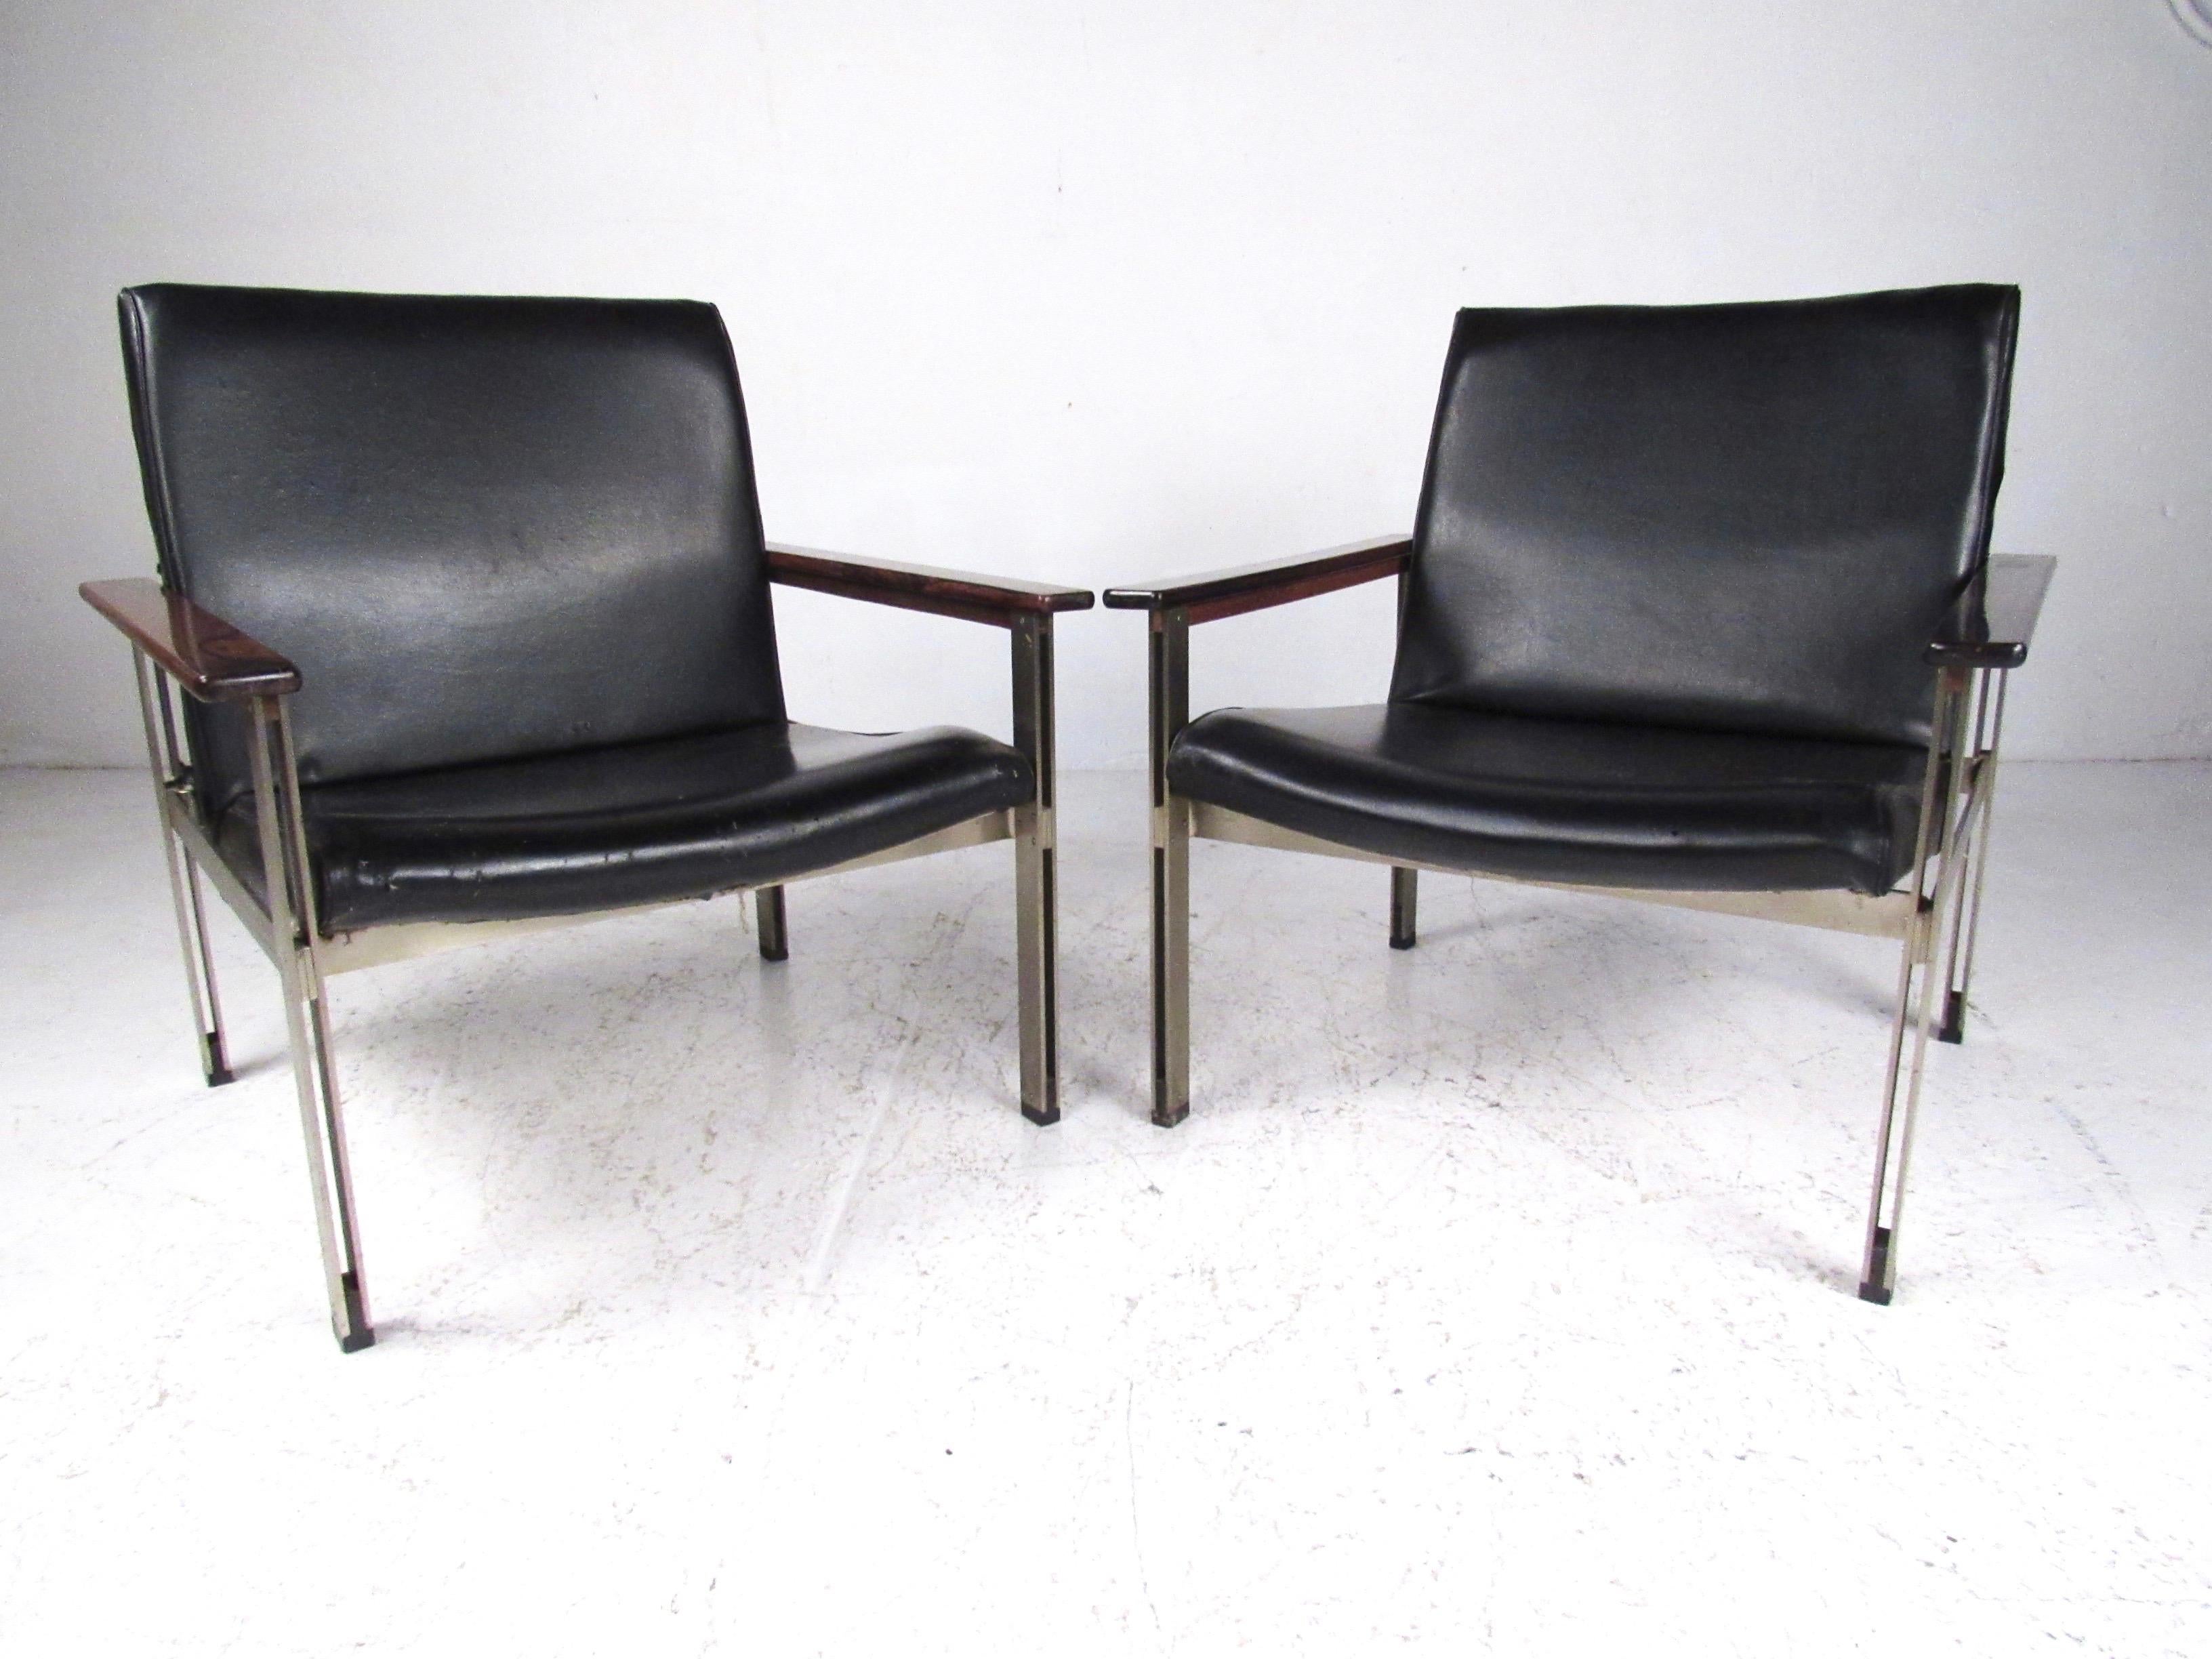 This stylish pair of matching lounge chairs features midcentury Italian modern design with Rosewood armrests and metal base frames. With eye-catching style and uniquely shaped seat backs, this vintage pair of armchairs make a distinguished yet